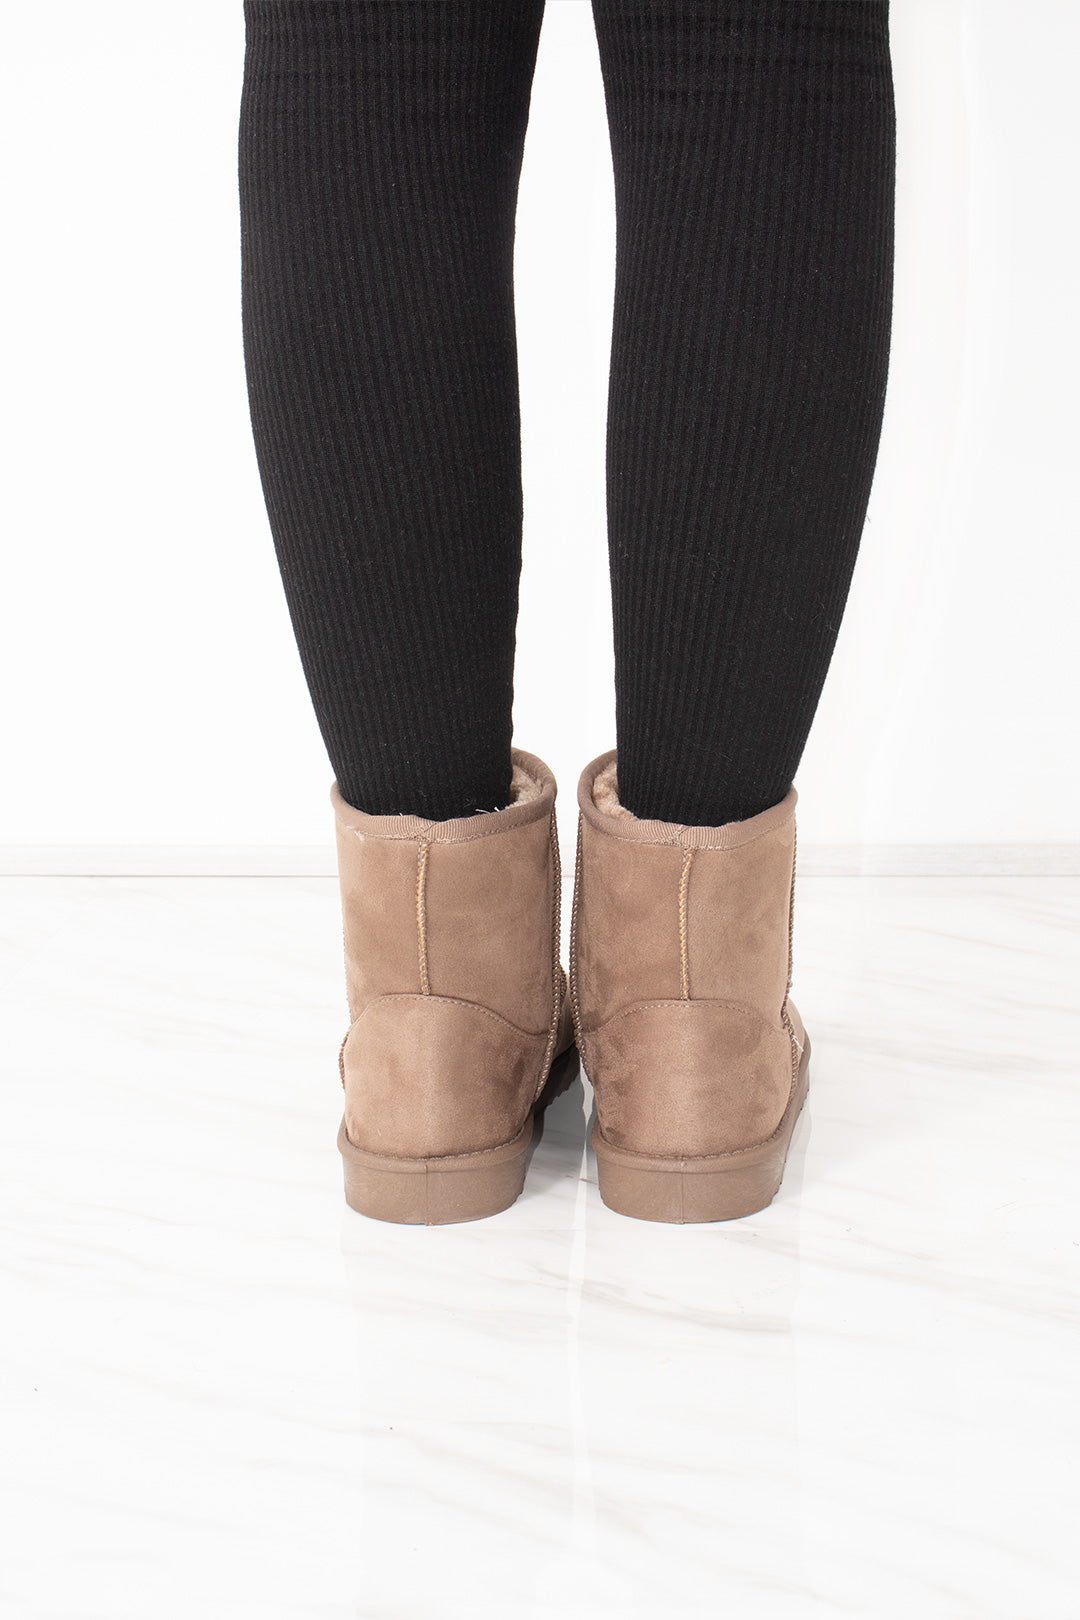 Taupe Faux Suede Fur Lined Mini Ankle Boots